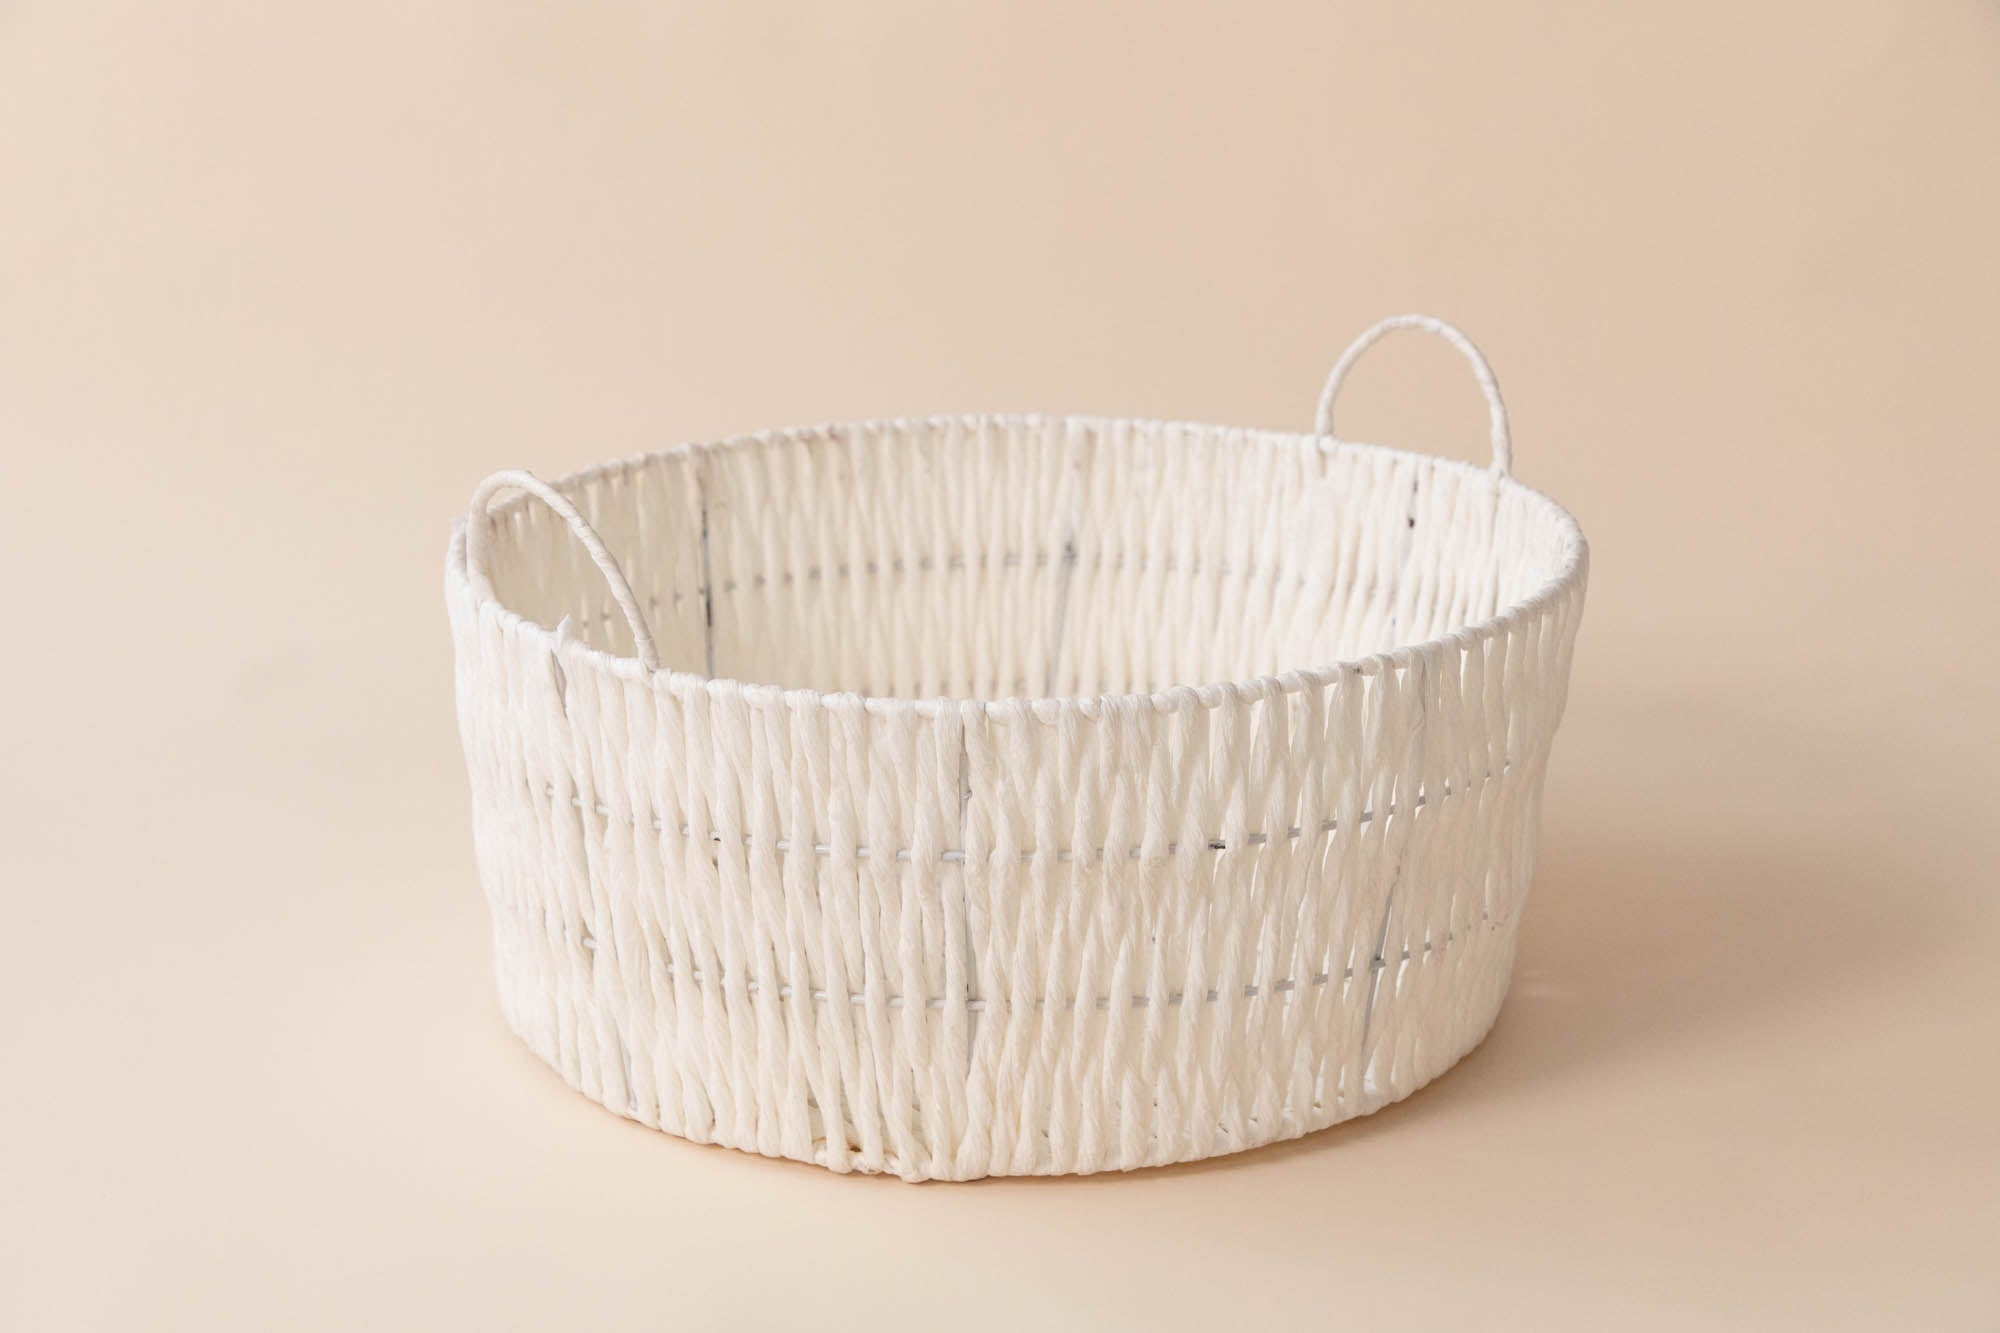 Kate Handmade Woven Round Basket Cream Color Newborn Photography Props